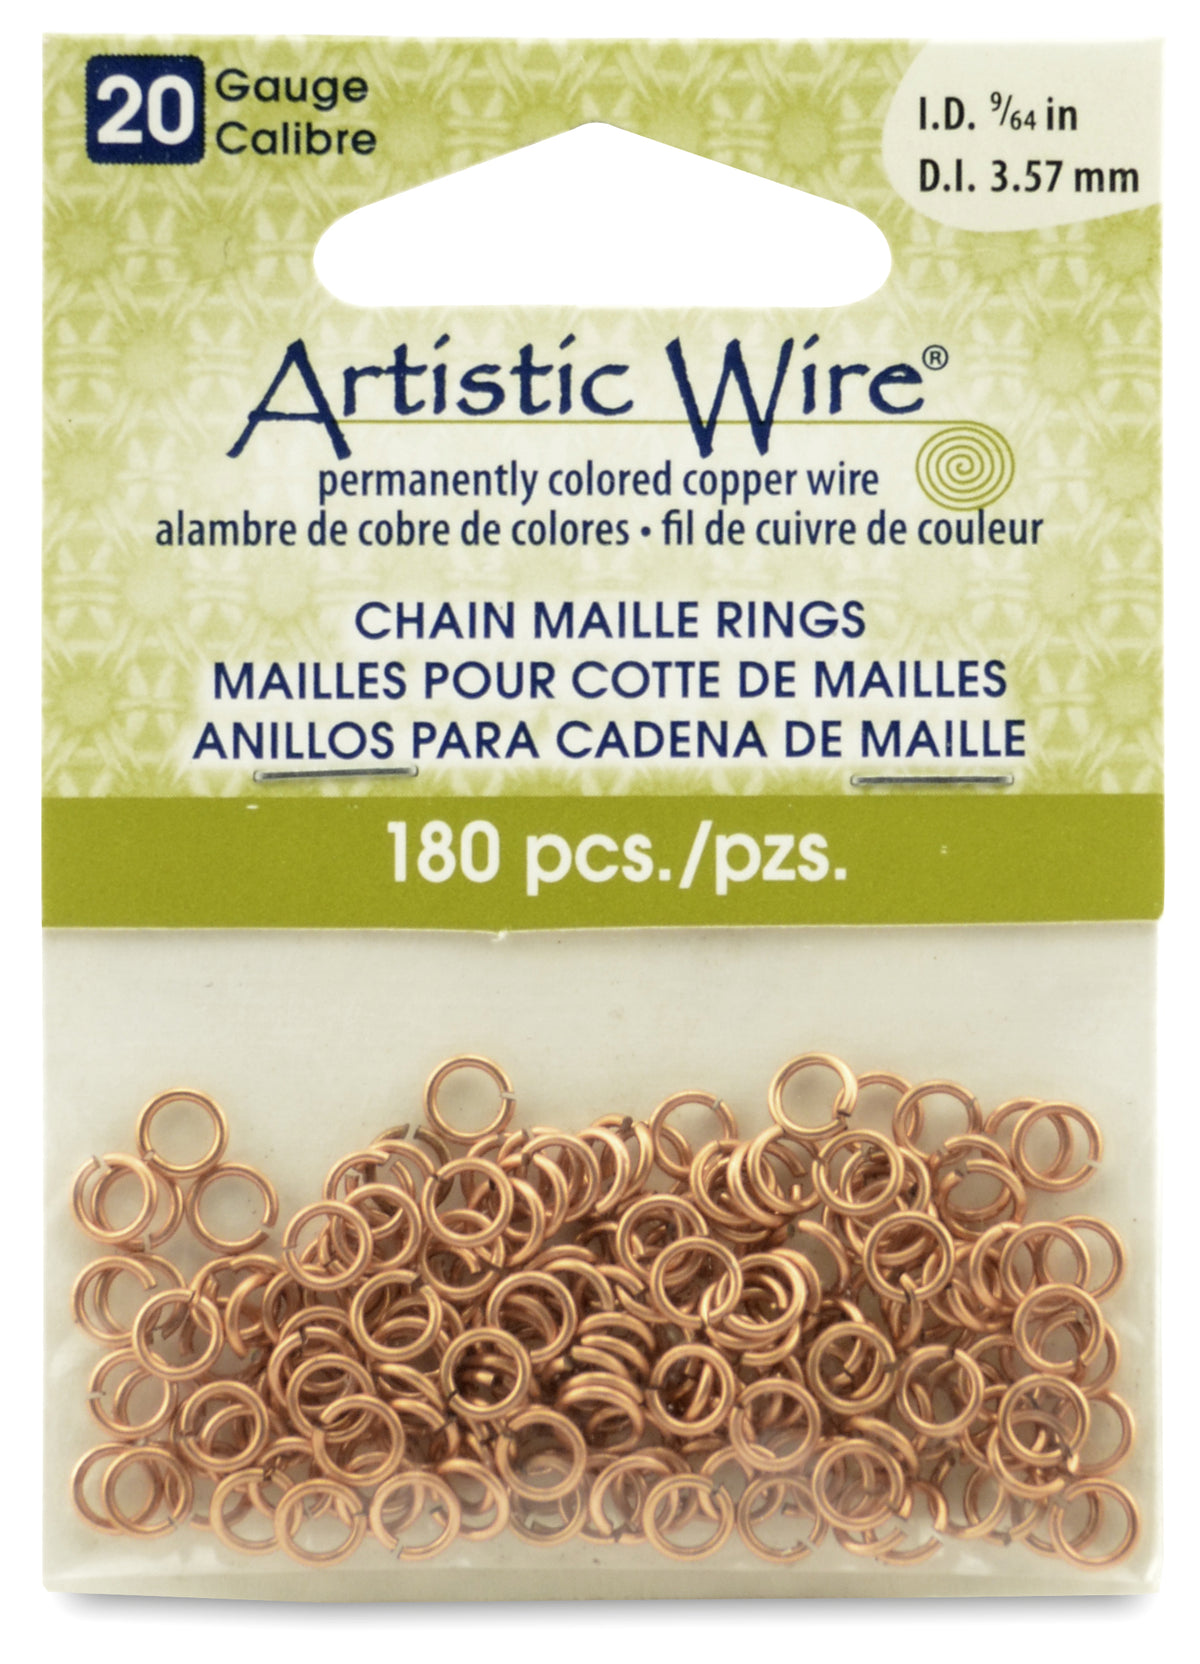 20 Gauge Artistic Wire, Chain Maille Rings, Round, Natural, 9/64 in (3.57 mm), 180 pc